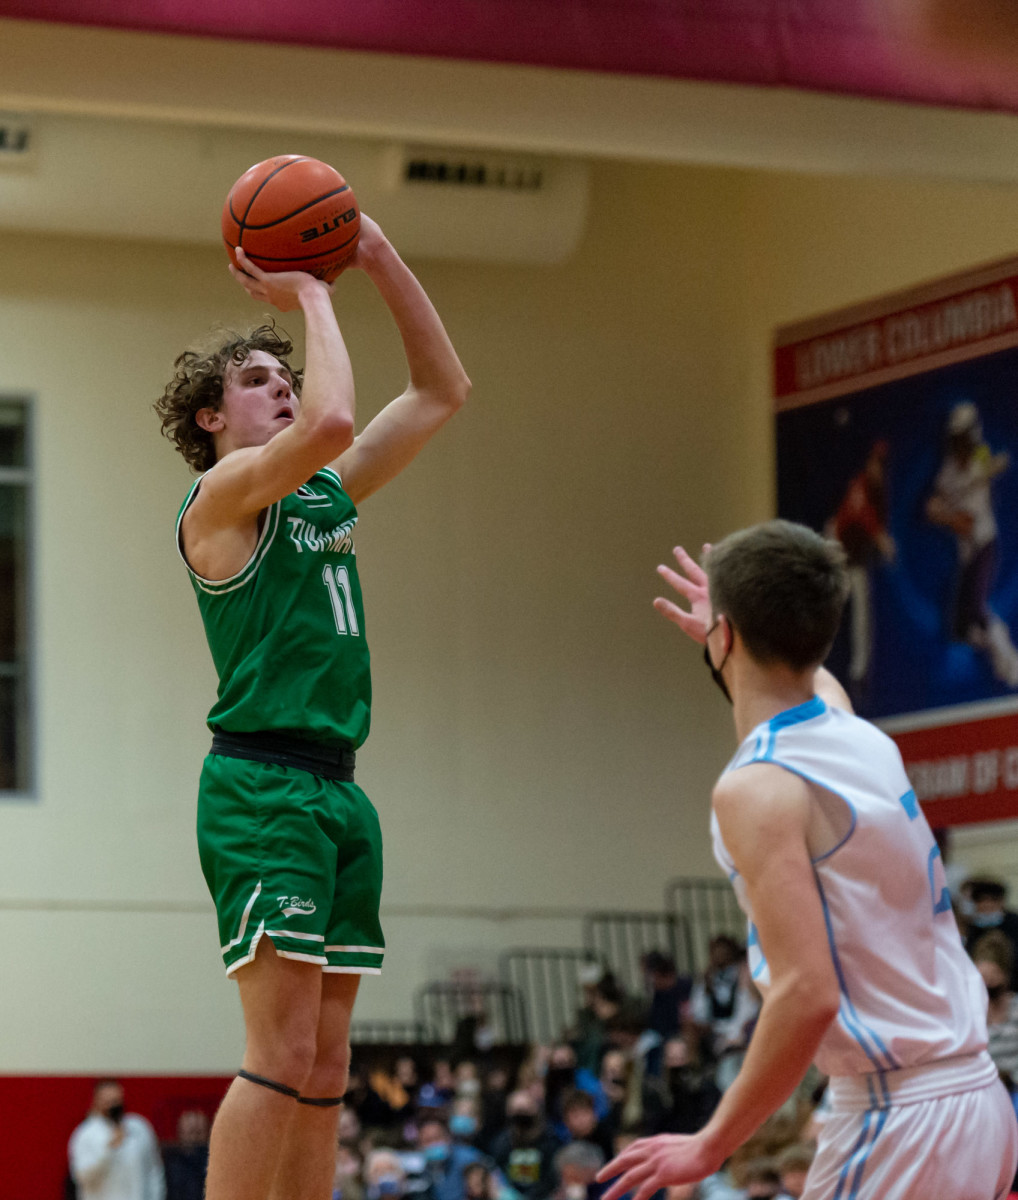 Tumwater's Luke Brewer shoots a jumper in a Lower Columbia College's Martin Luther King Jr. Tribute game on Monday, Jan. 17, 2022, at Myklebust Gymnasium in Longview. Tumwater won 64-52 over Mark Morris. (Joshua Hart/For ScorebookLive)